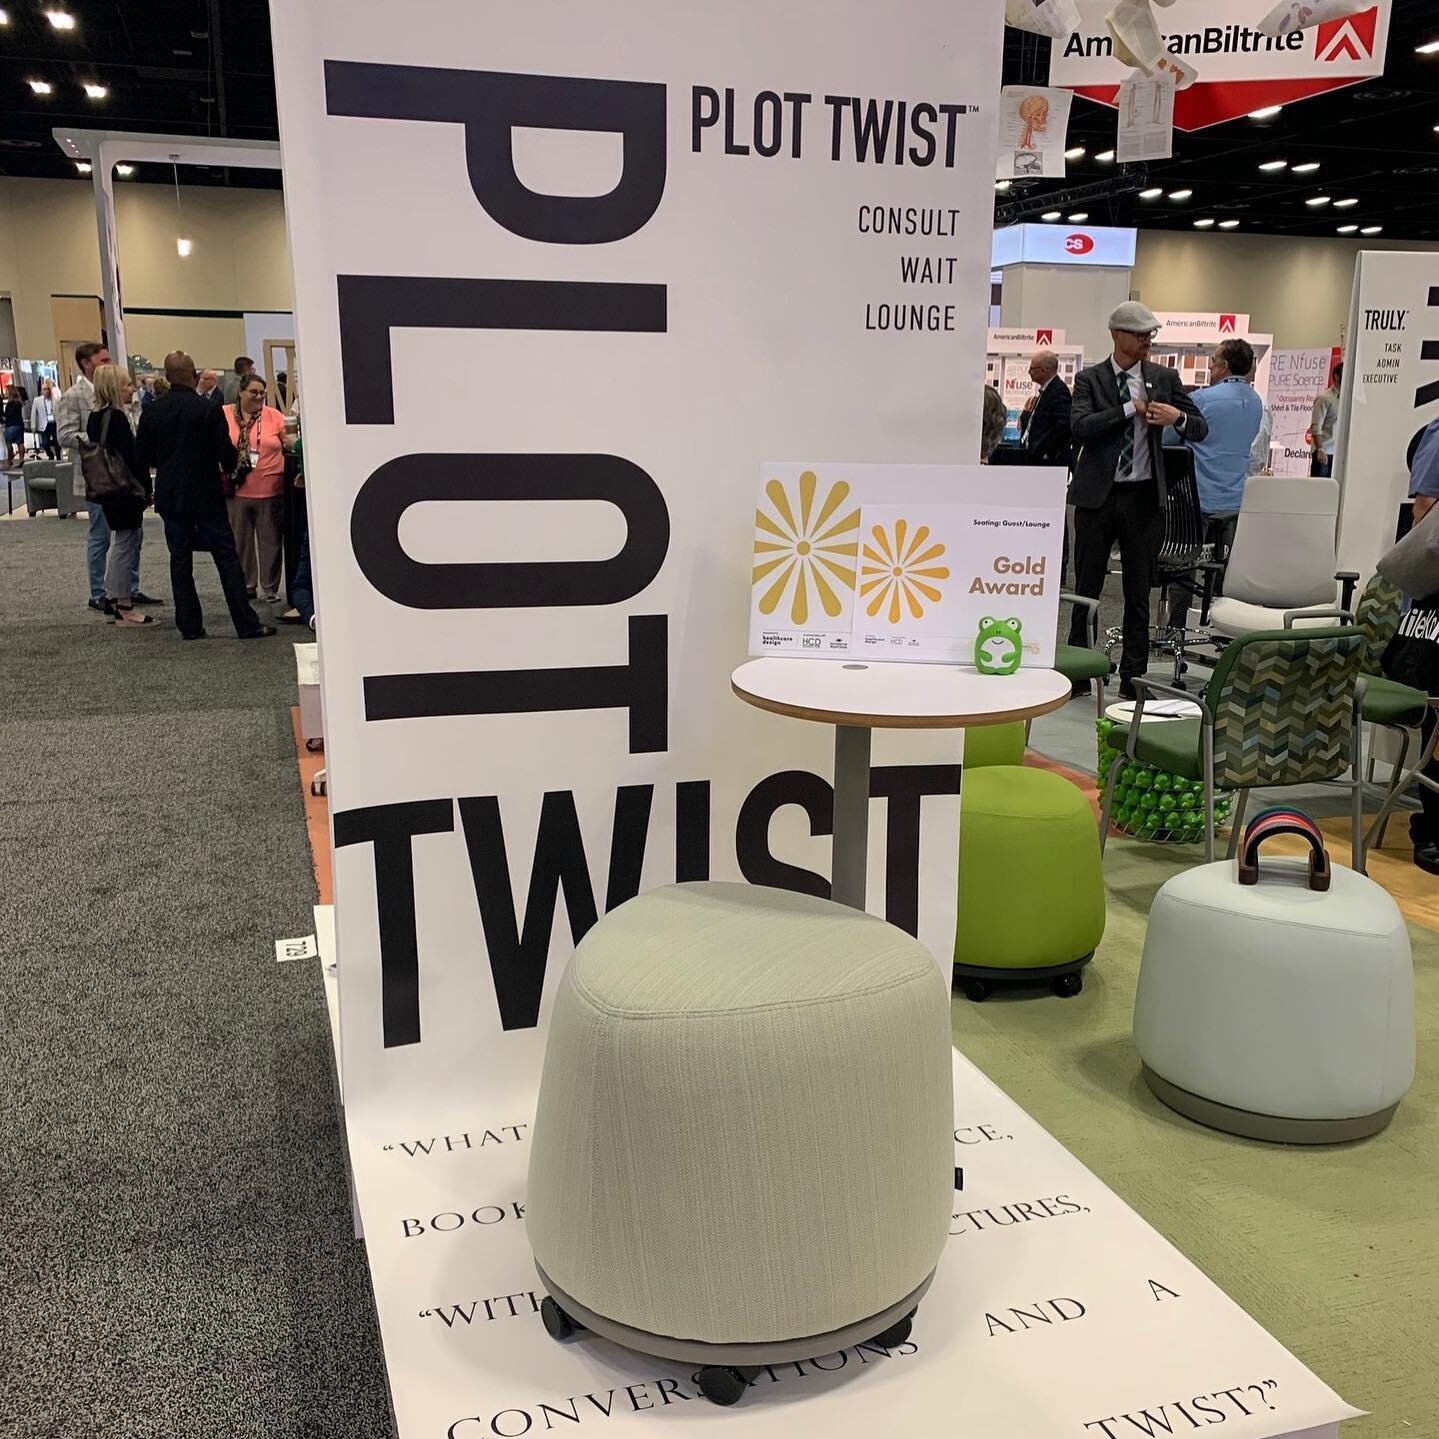 We are excited to announce that Plot Twist&trade; took home the 🏆Gold Award for the seating Guest/Lounge category for the 2022 Nightingale Awards! Thank you @omseating for putting on a great show at the HCD Expo. 

&hellip;

#plottwistseating #hcdma